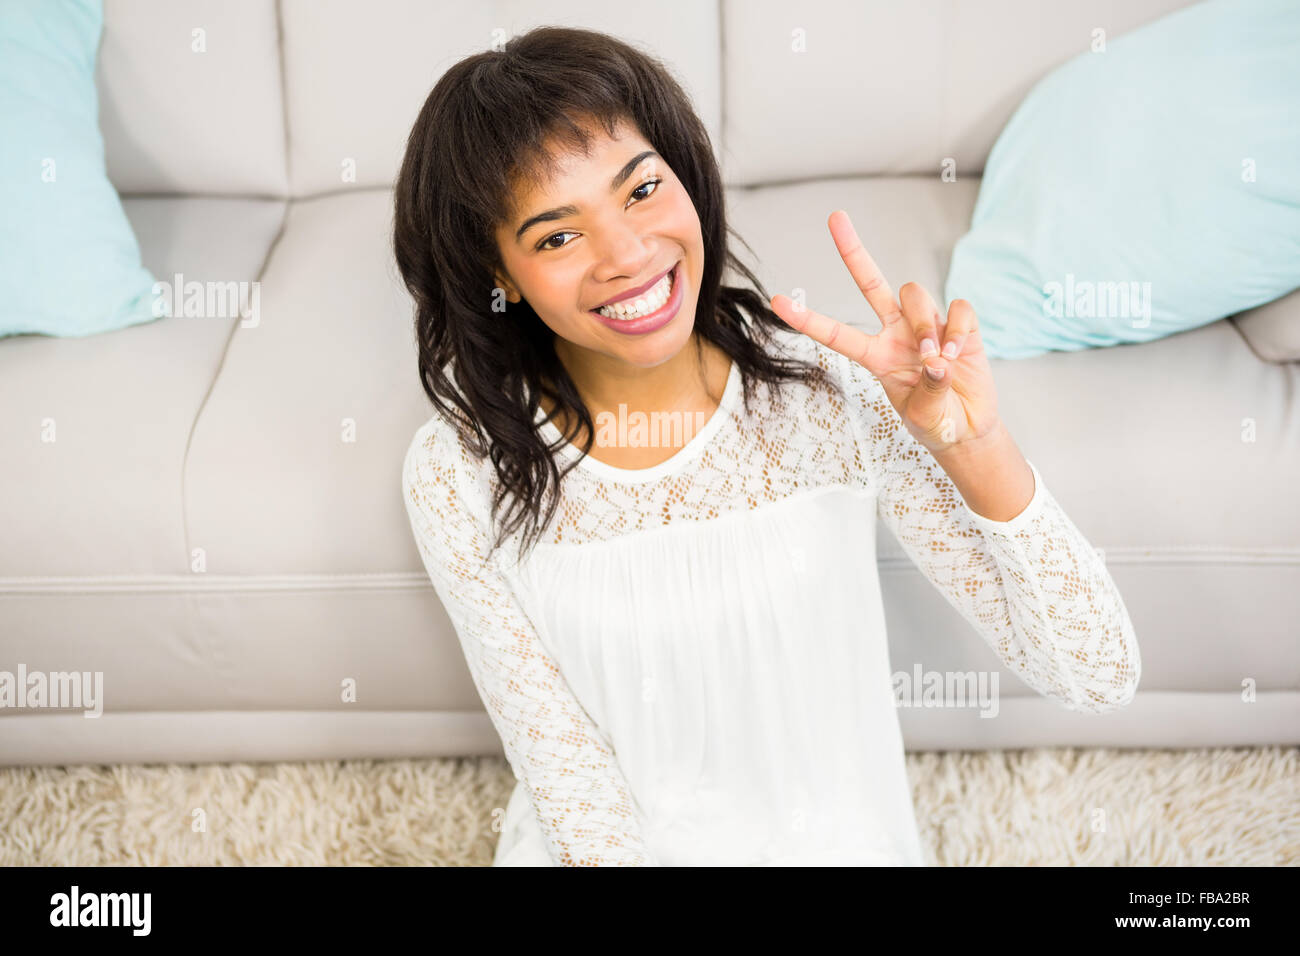 Casual smiling woman gesturing peace sign Stock Photo